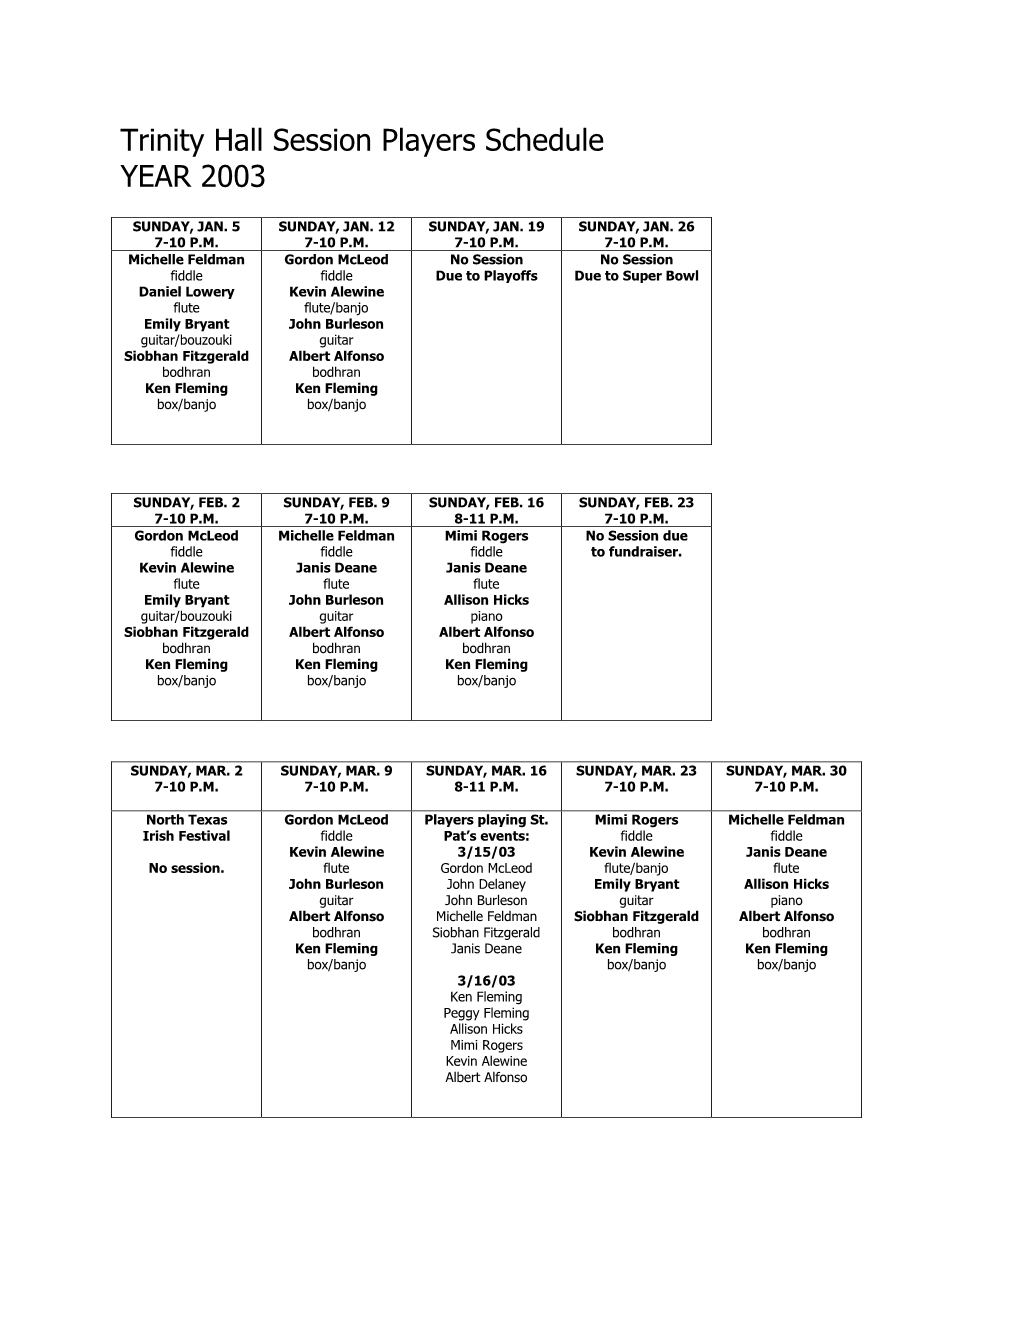 Trinity Hall Session Players Schedule YEAR 2003